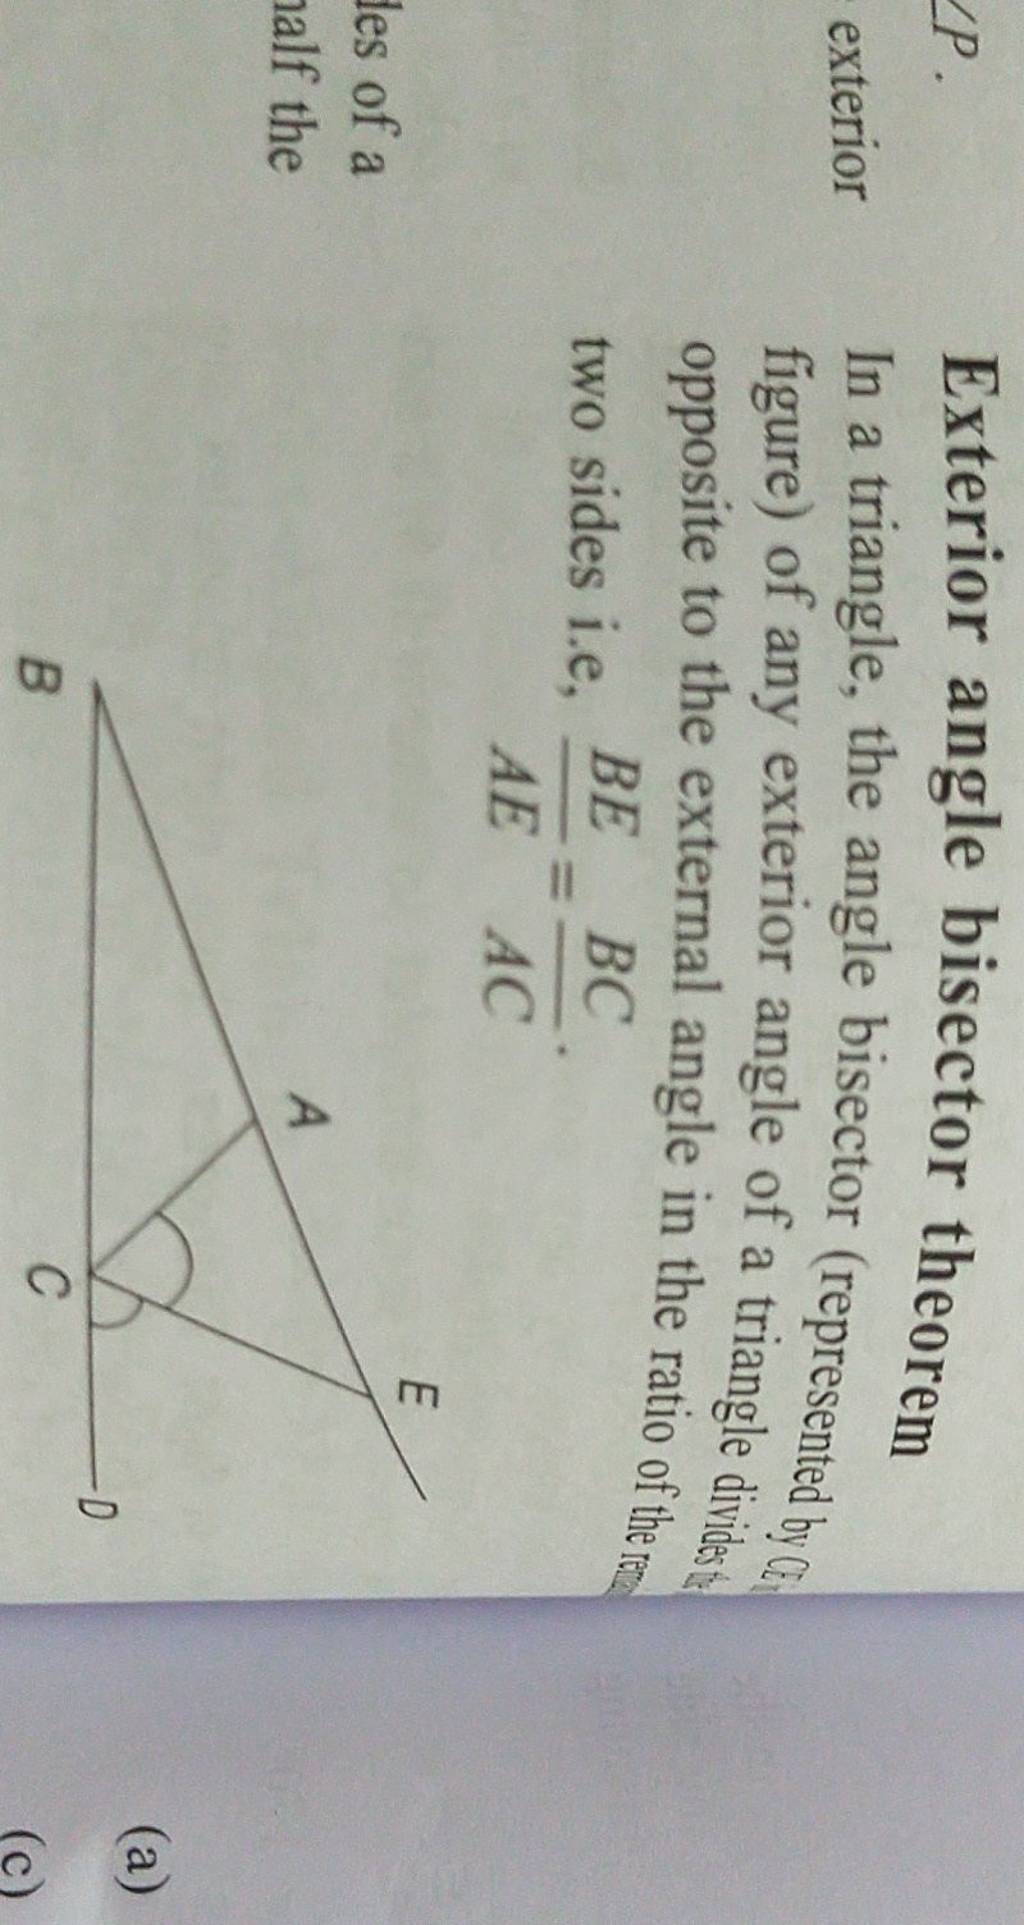 Exterior Angle Bisector Theorem In A Triangle The Angle Bisector Repres 7651